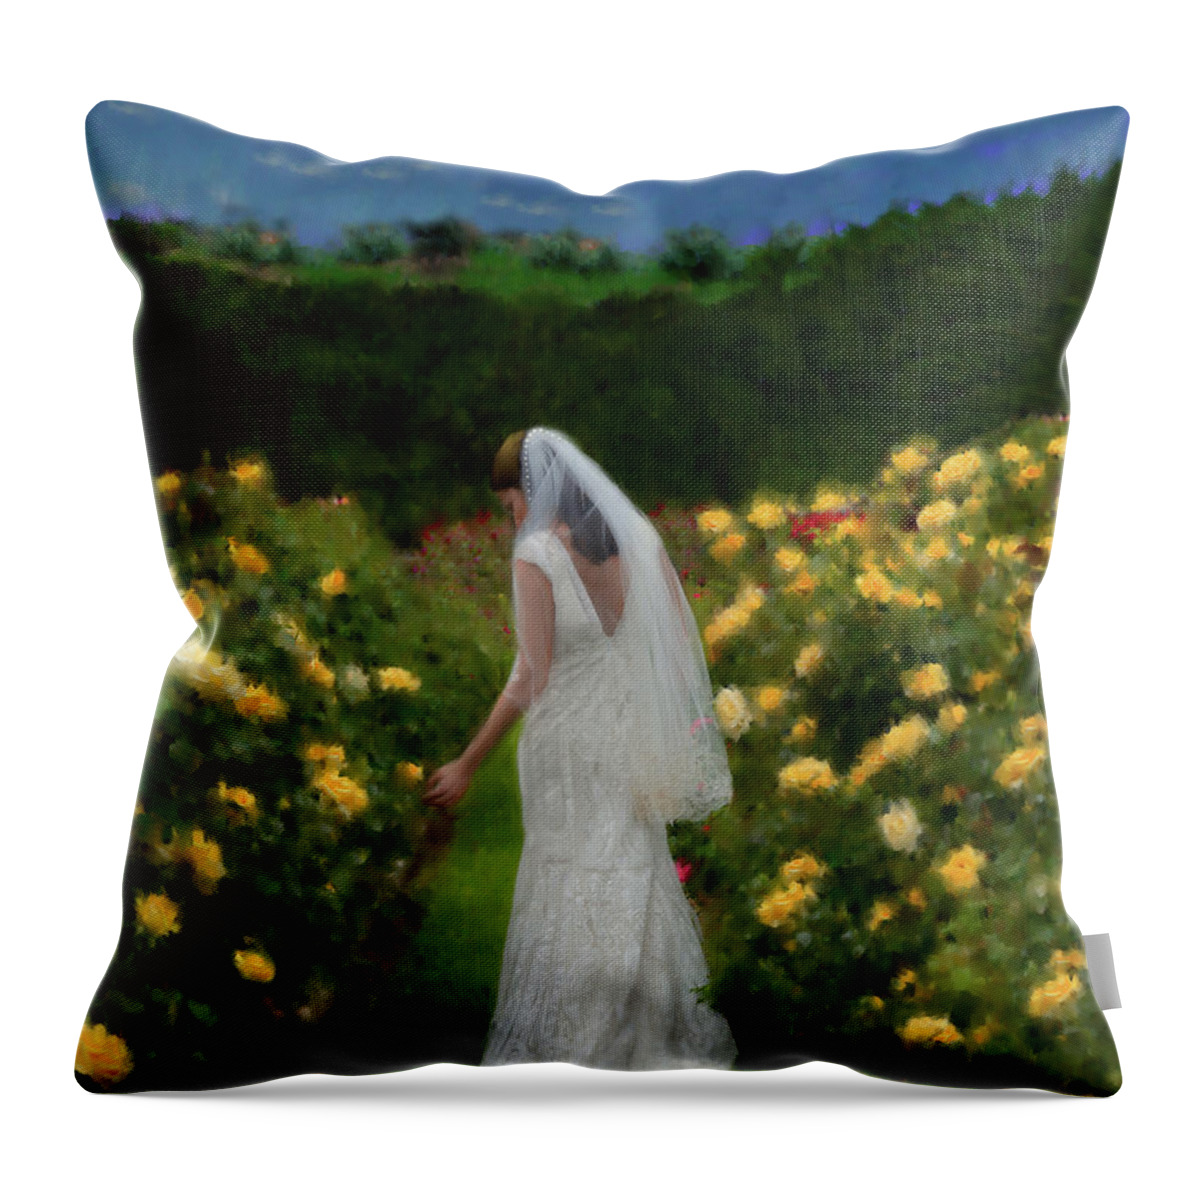 Bride Throw Pillow featuring the digital art Come To The Garden by Constance Woods